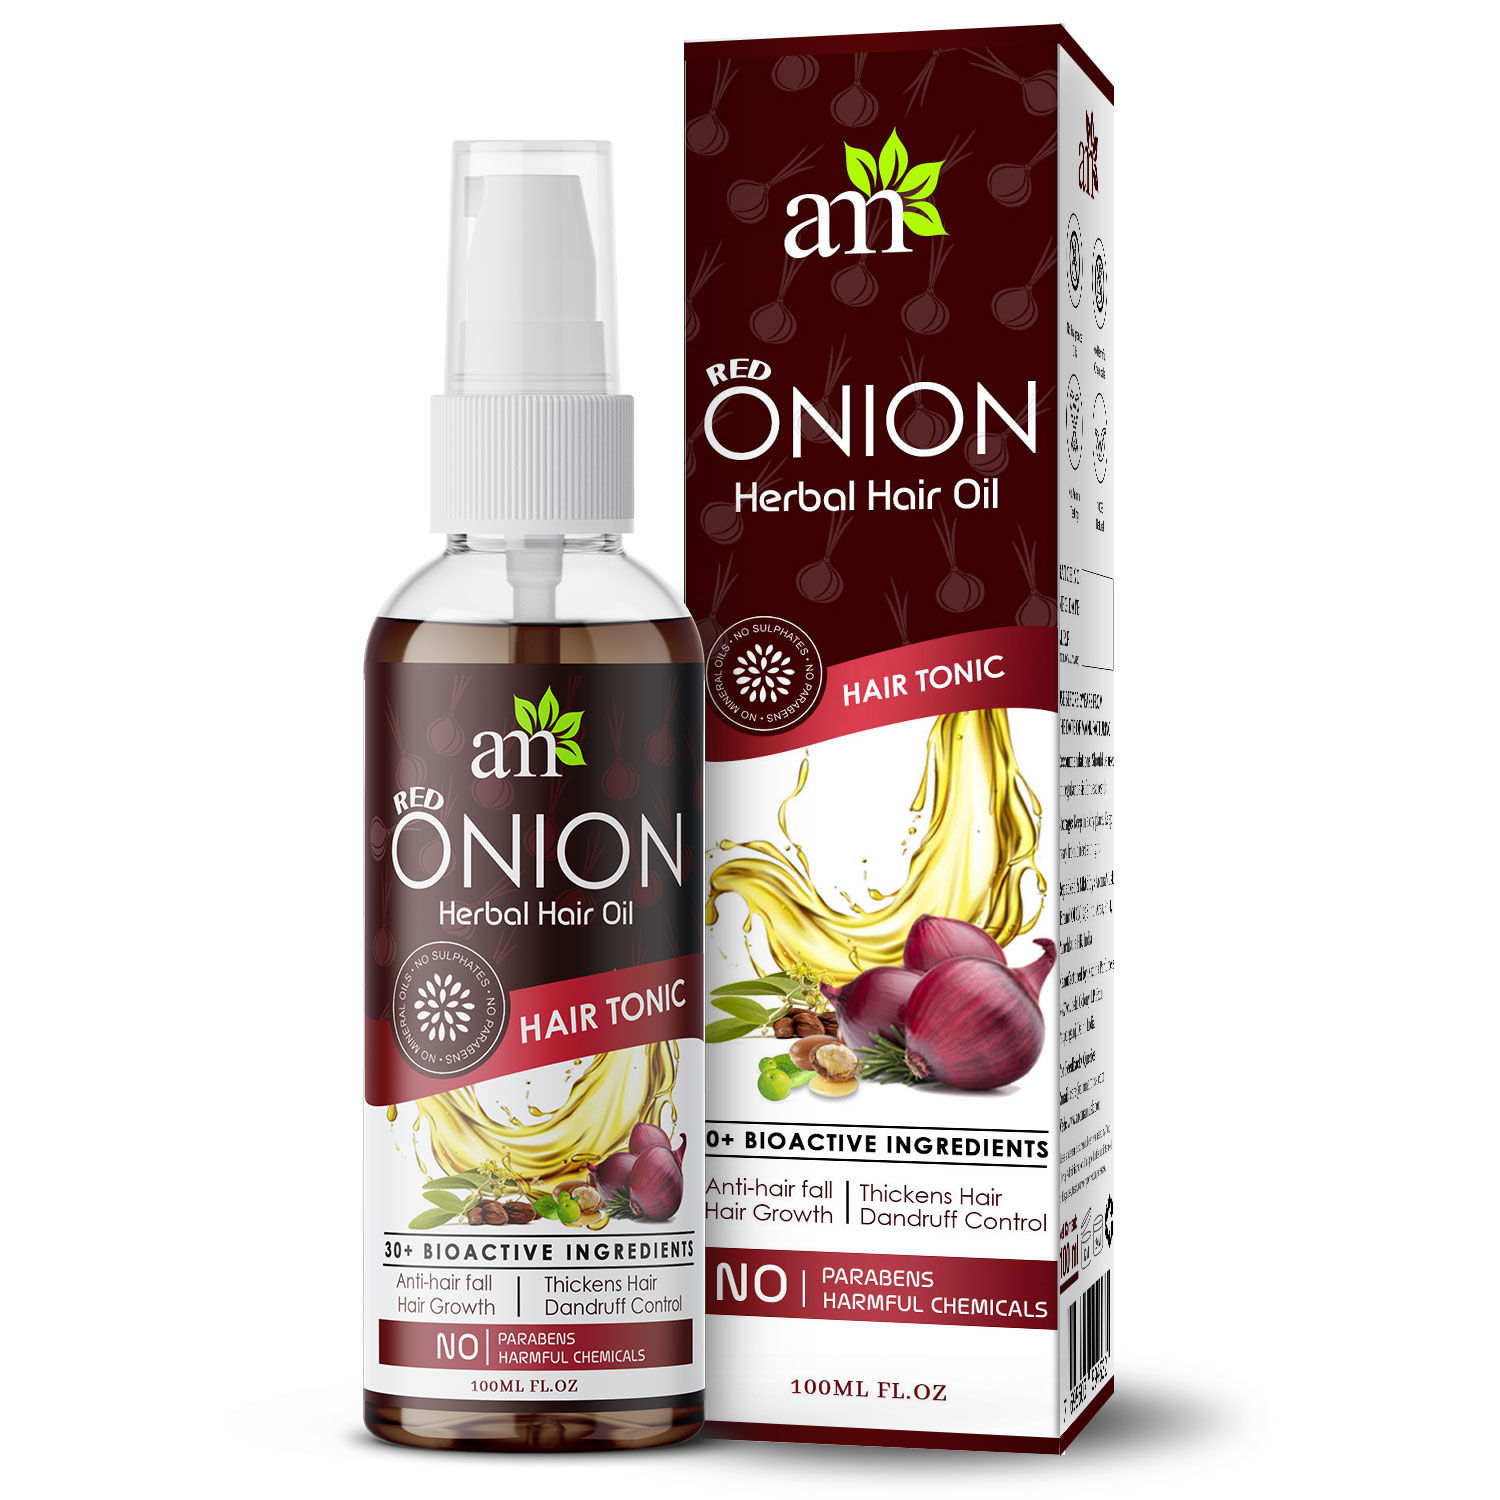 Buy AromaMusk Red Onion Hair Oil For Hair Growth, (100 ml) - With 30+ Bioactive Oils & Extracts Including Argan Oil, Castor, Almond, Jojoba And Vitamin E Oil For Complete Hair Care (100 ml) - Purplle